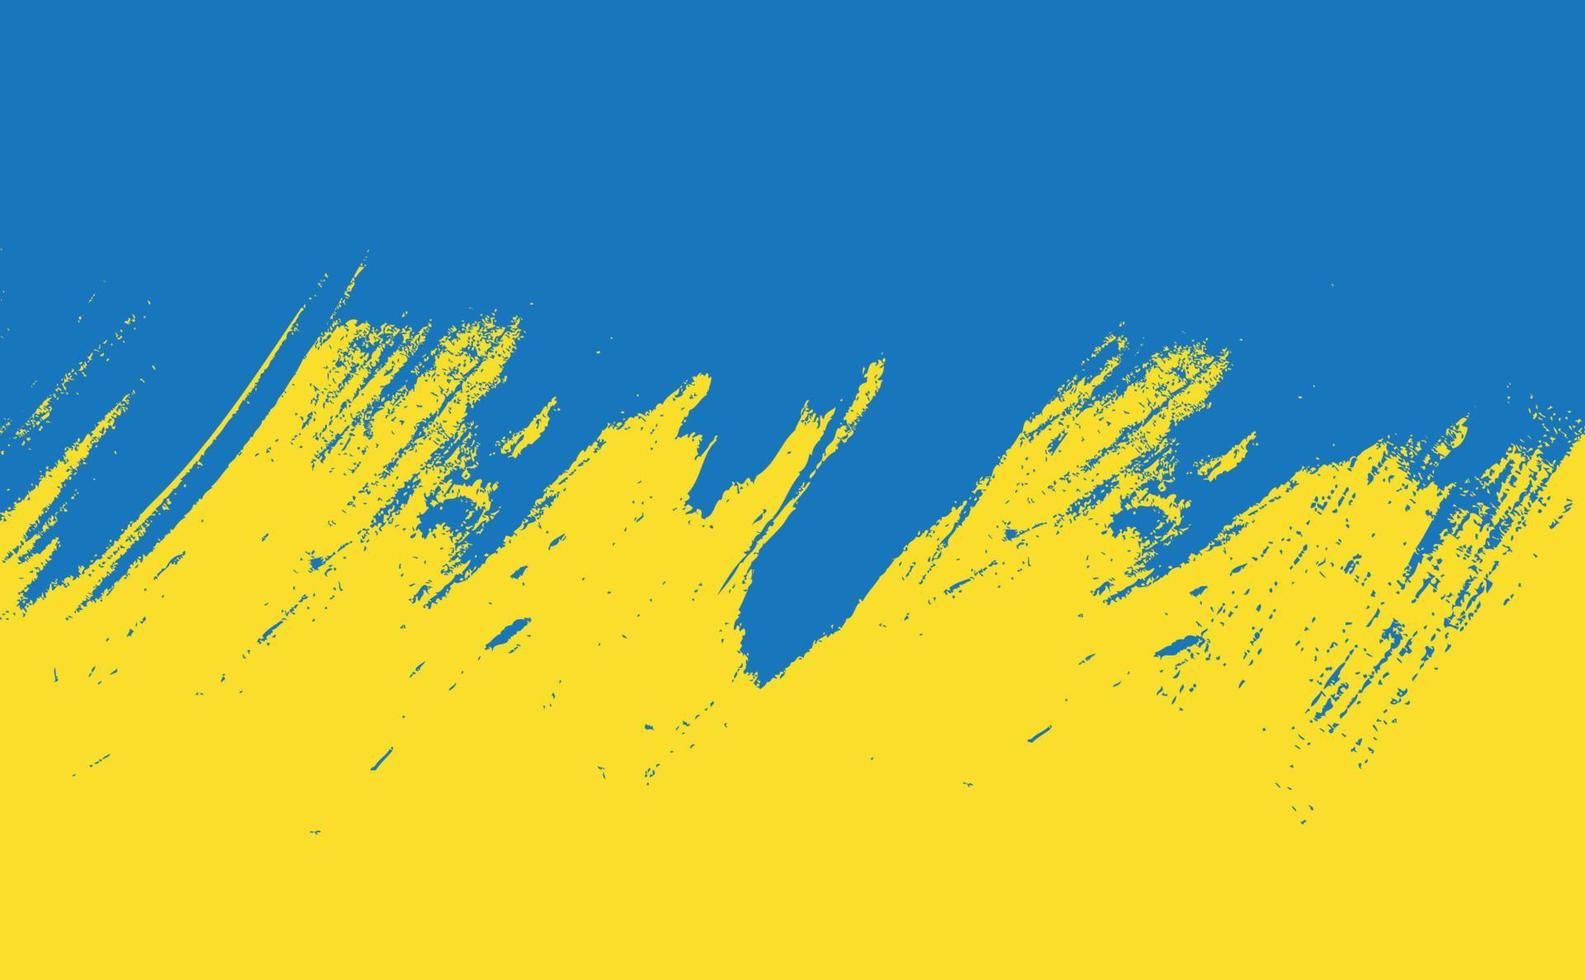 Abstract yellow and blue grunge texture, watercolor paint brush stroke. Flag of Ukraine. Background. vector